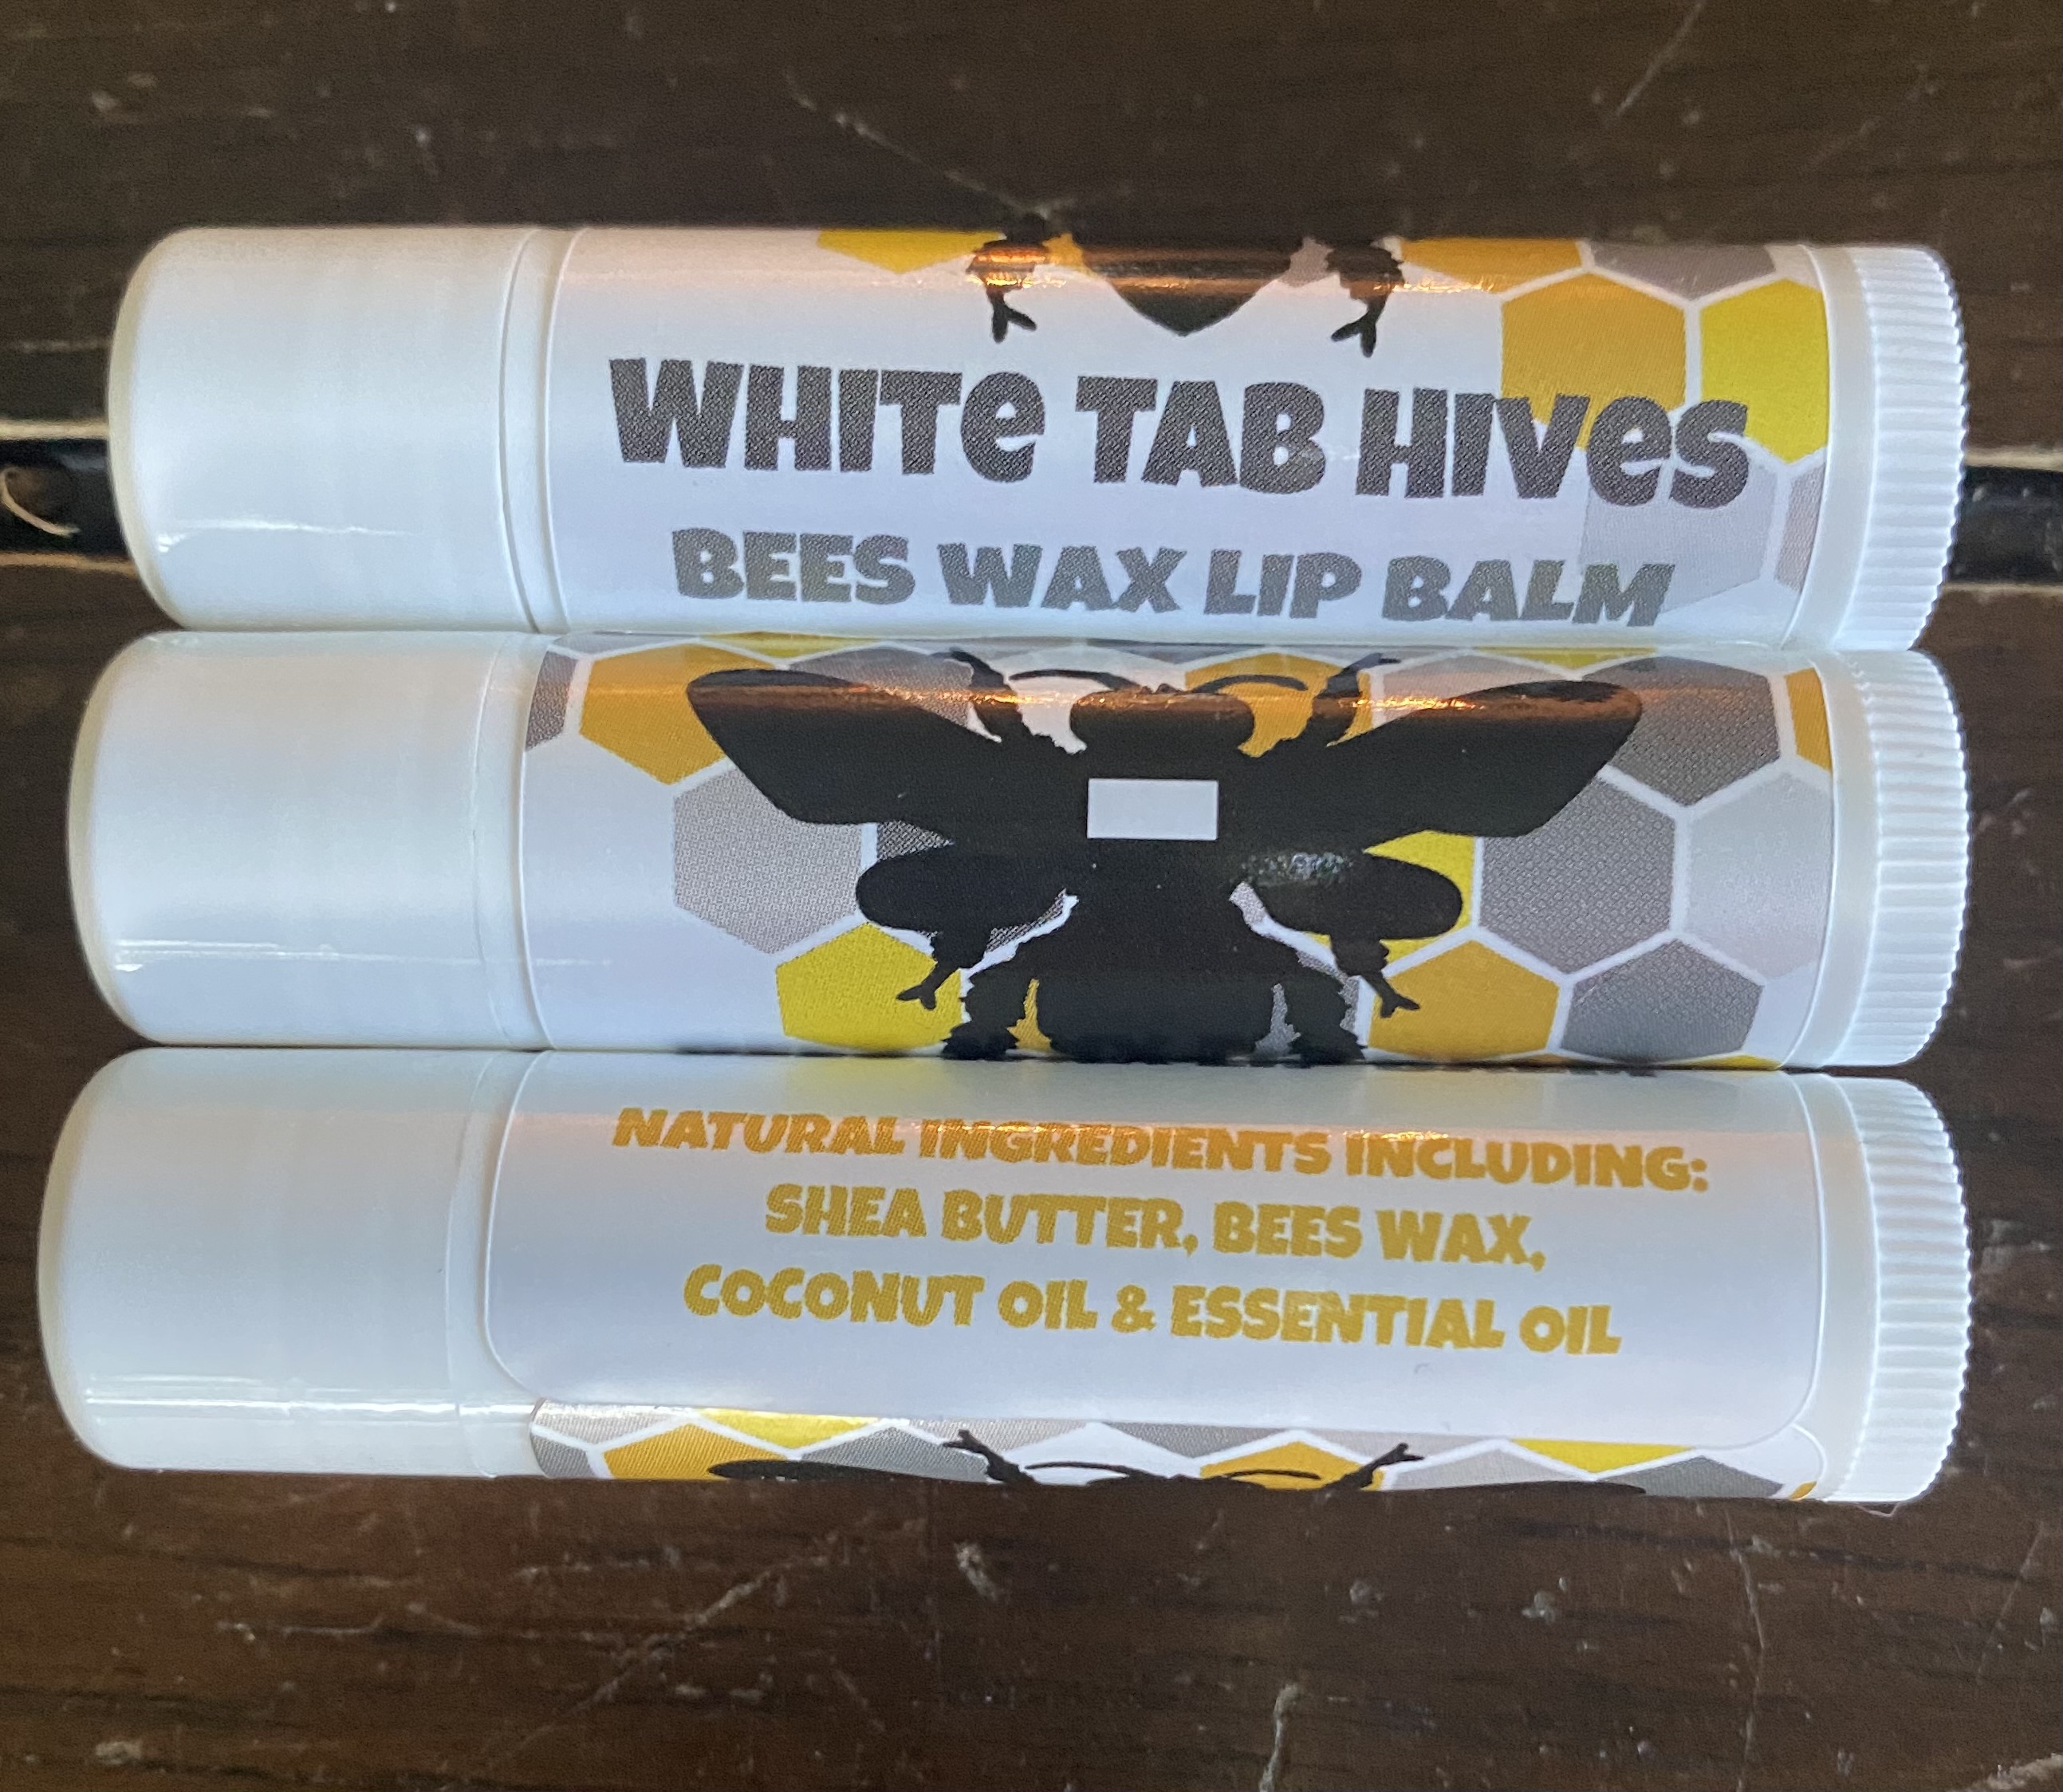 ConseCrate Subscribers are Buzzing about White Tab Hives